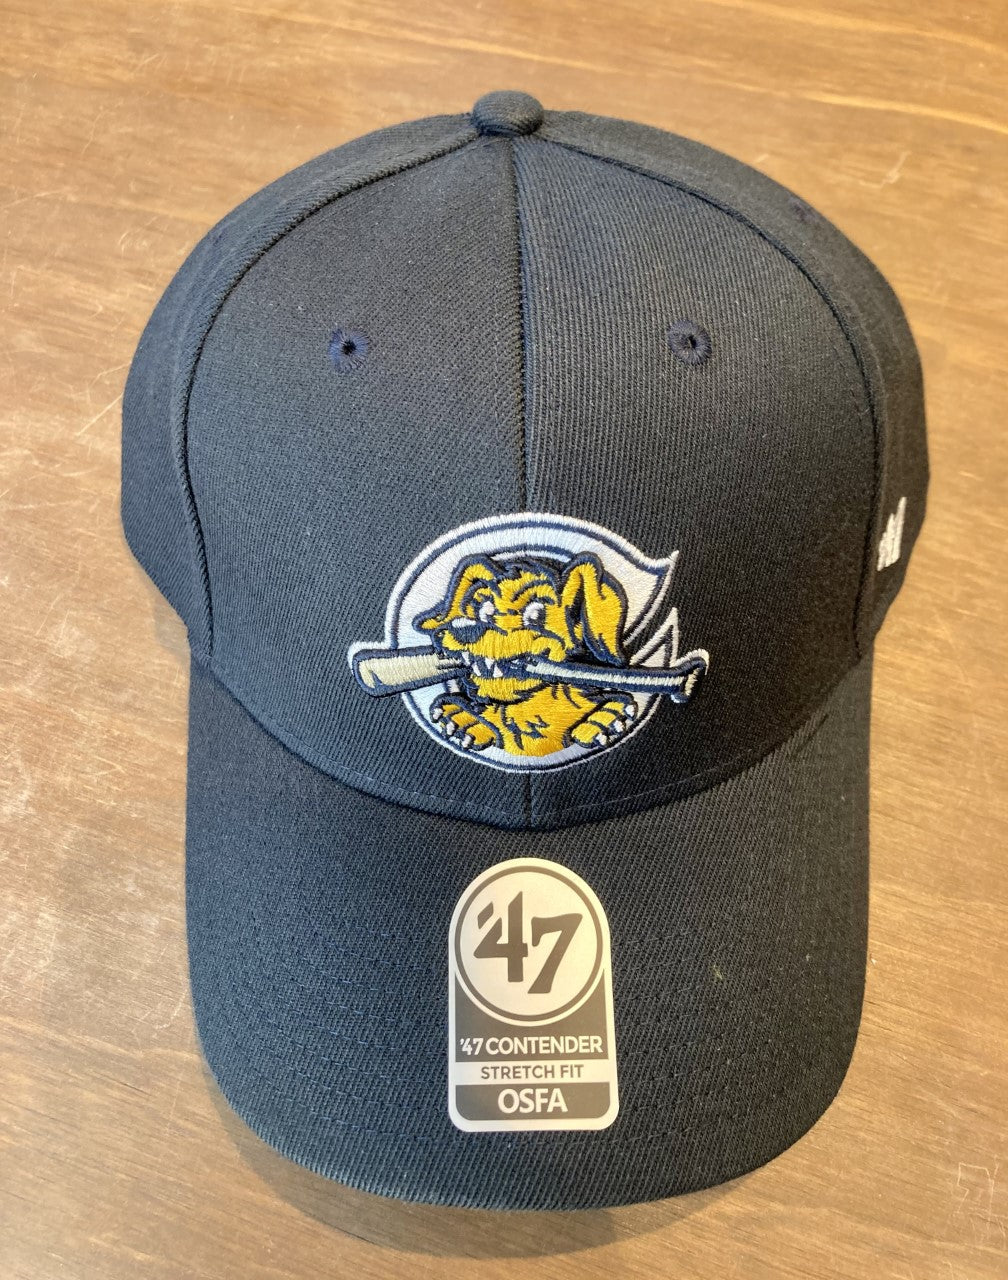 Charleston RiverDogs Official Store